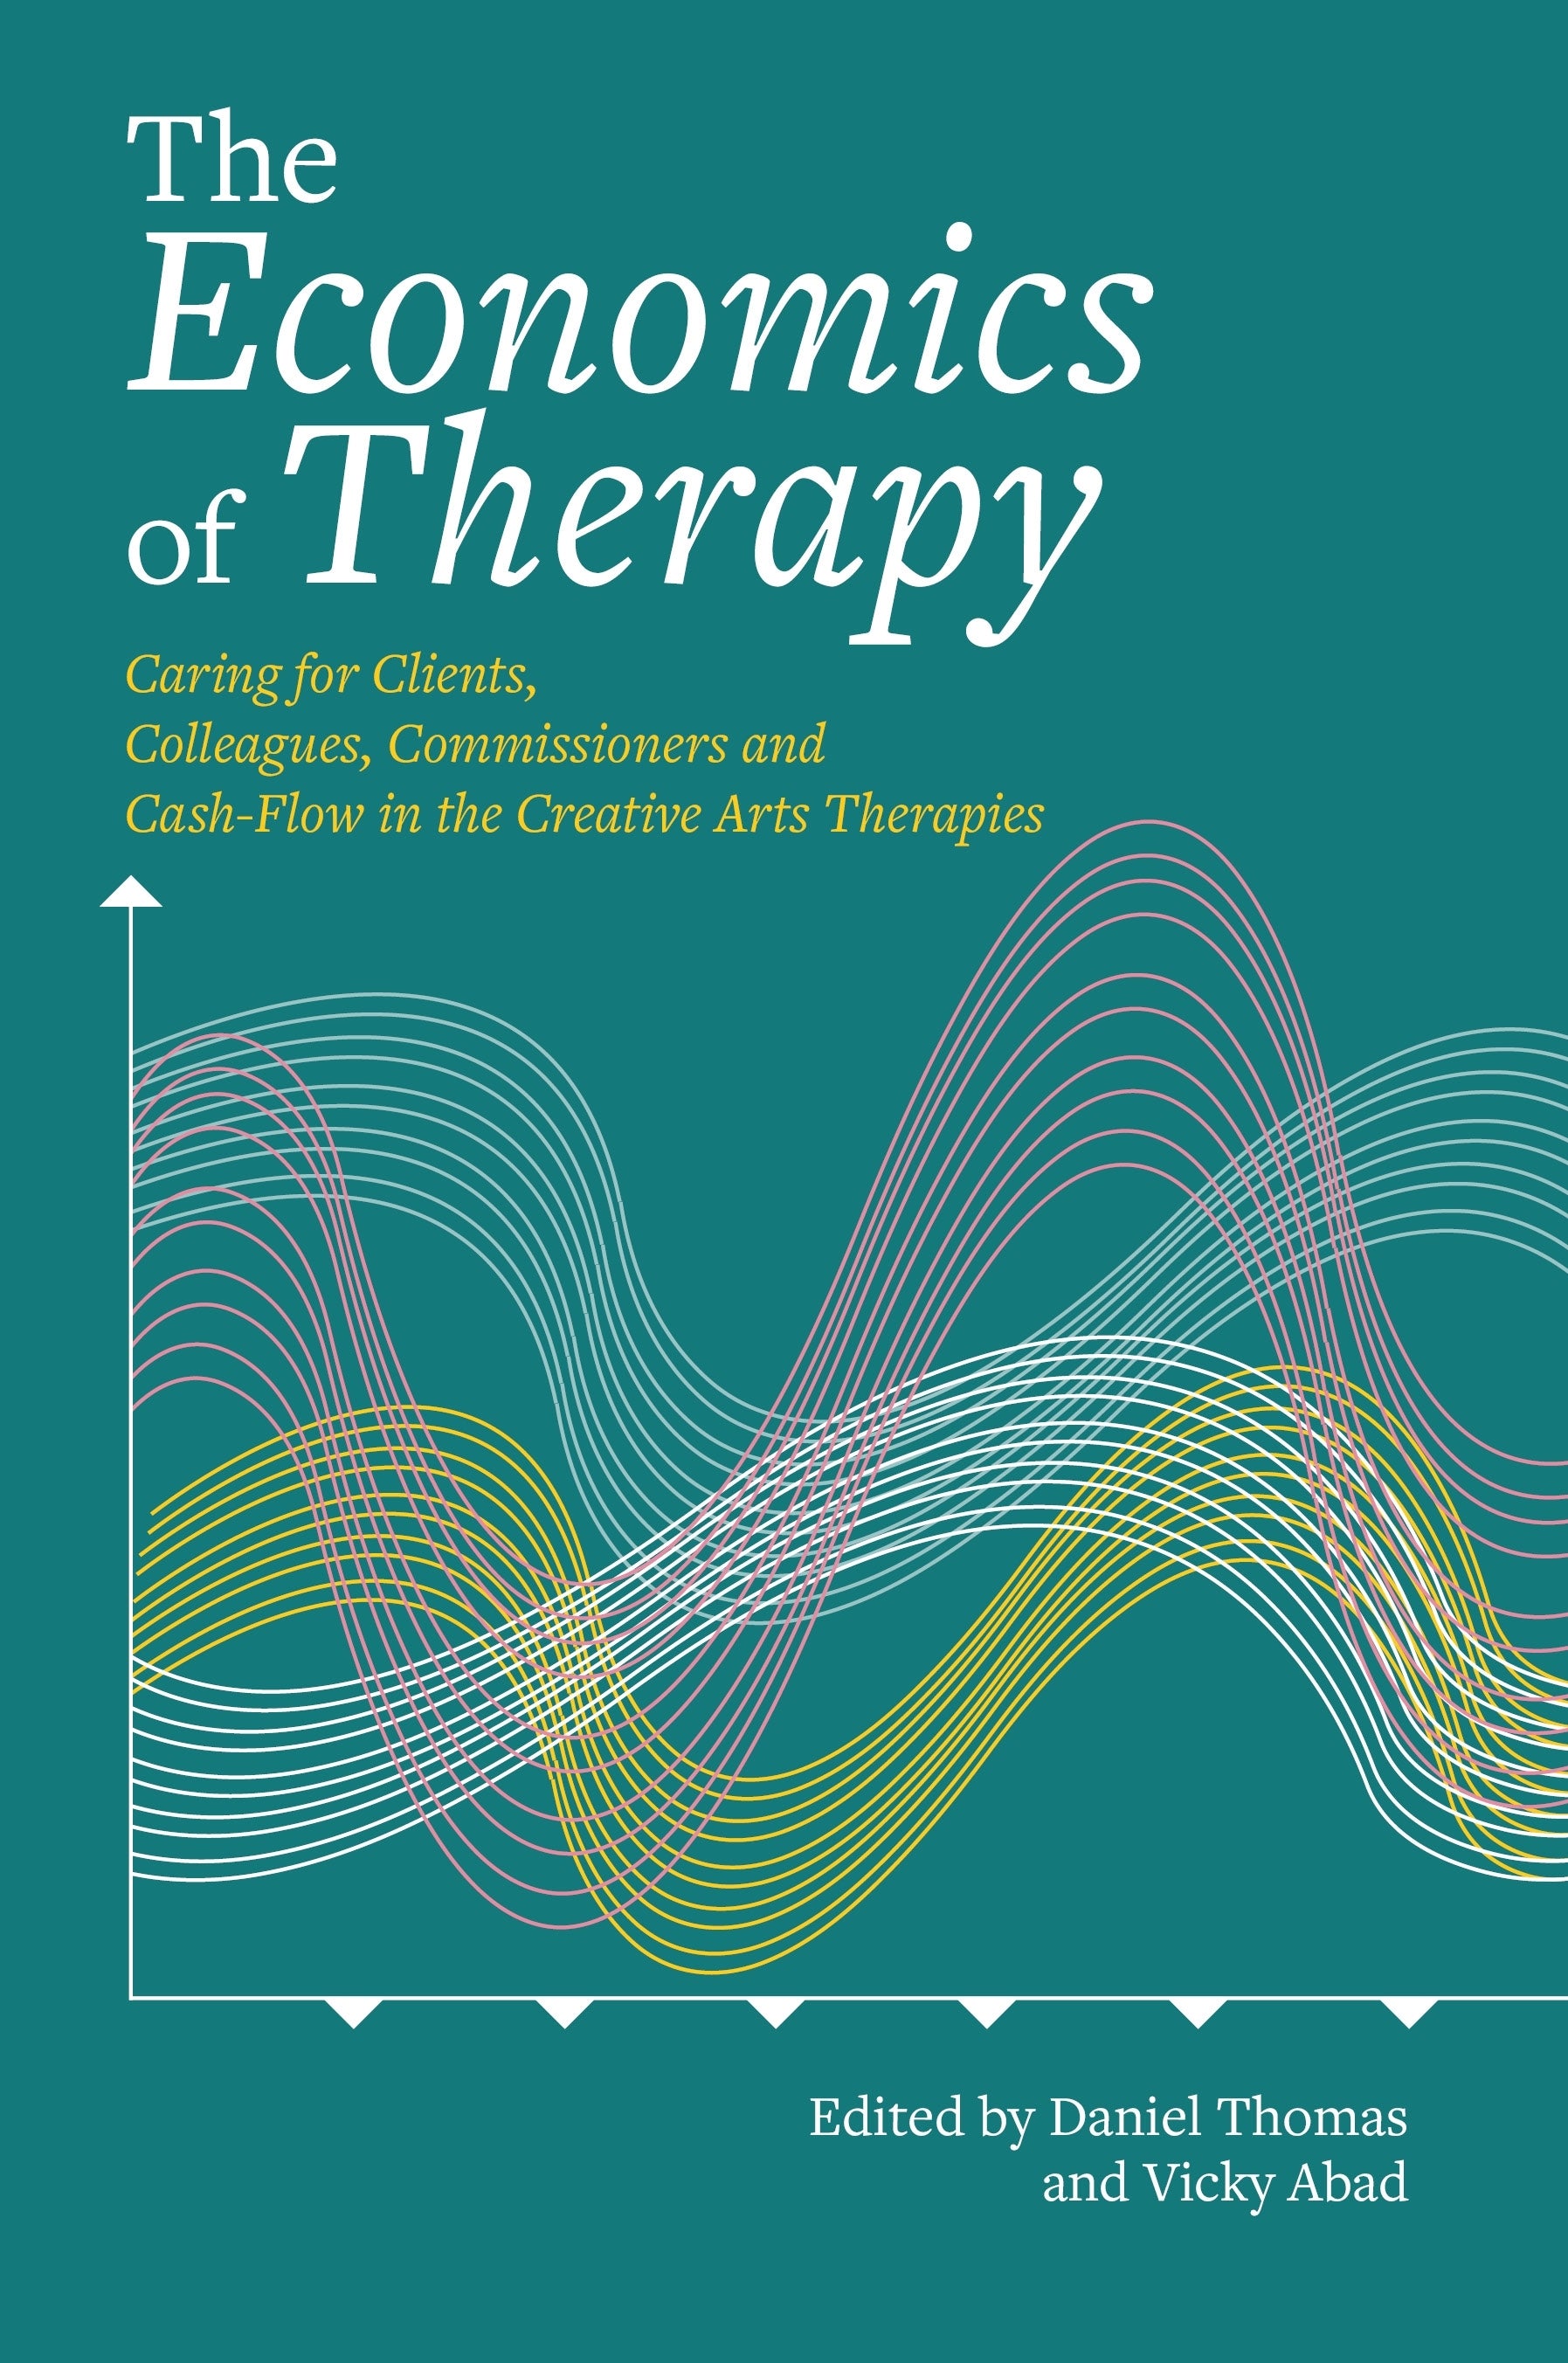 The Economics of Therapy by Daniel Thomas, Vicky Abad, Brynjulf Stige, No Author Listed